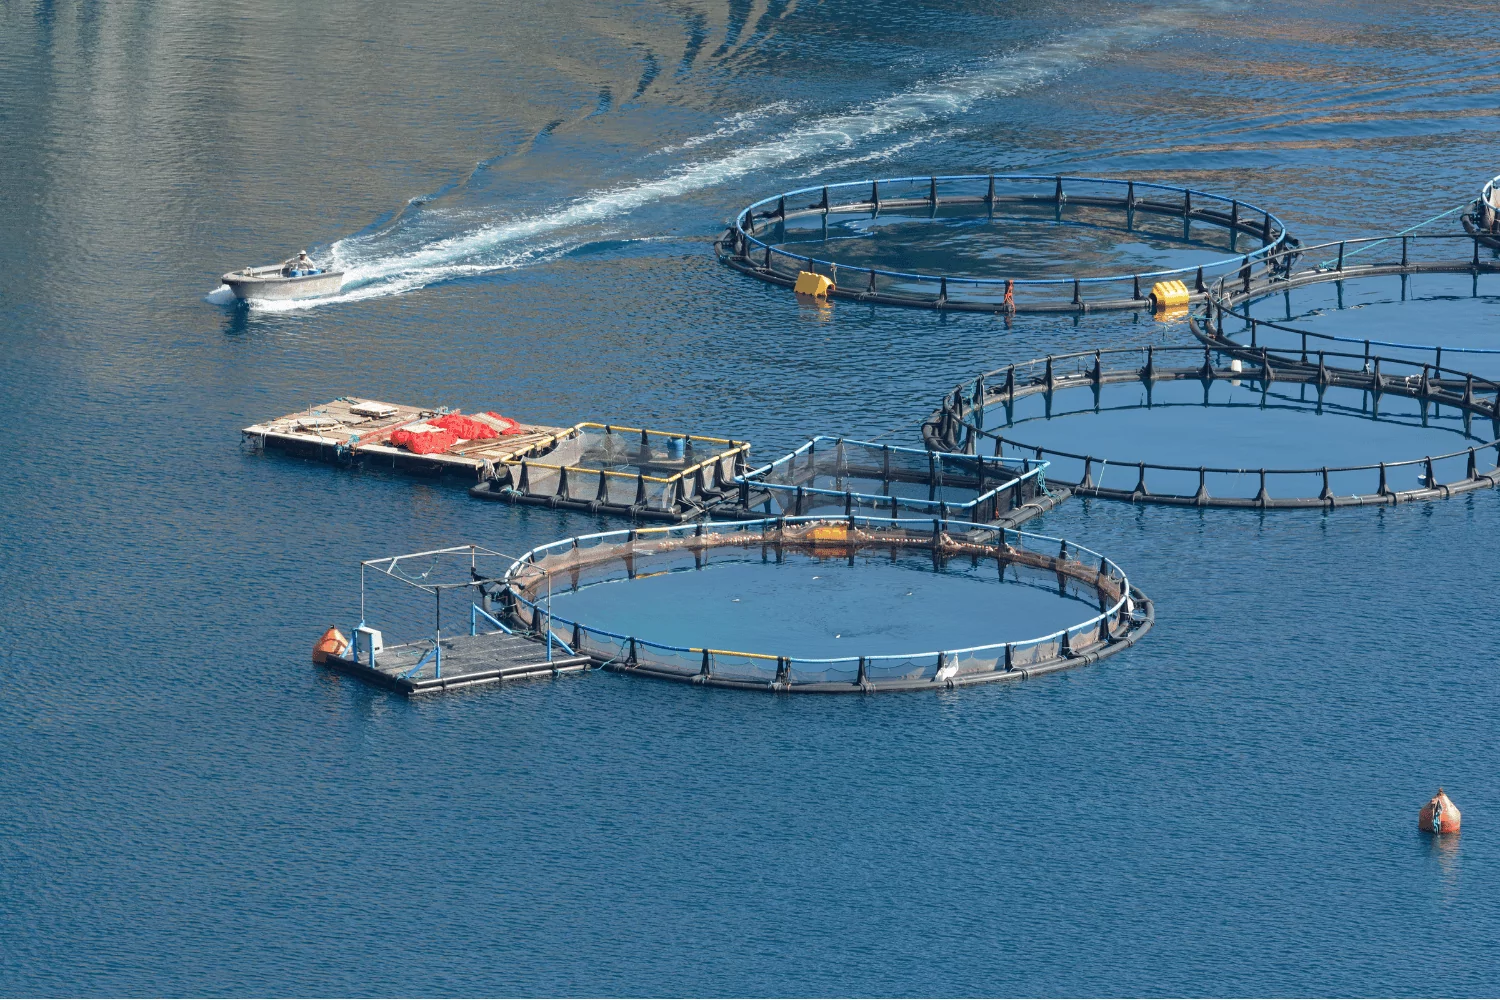 One of the central challenges revolves around integrating AI with diverse and often complex aquaculture systems